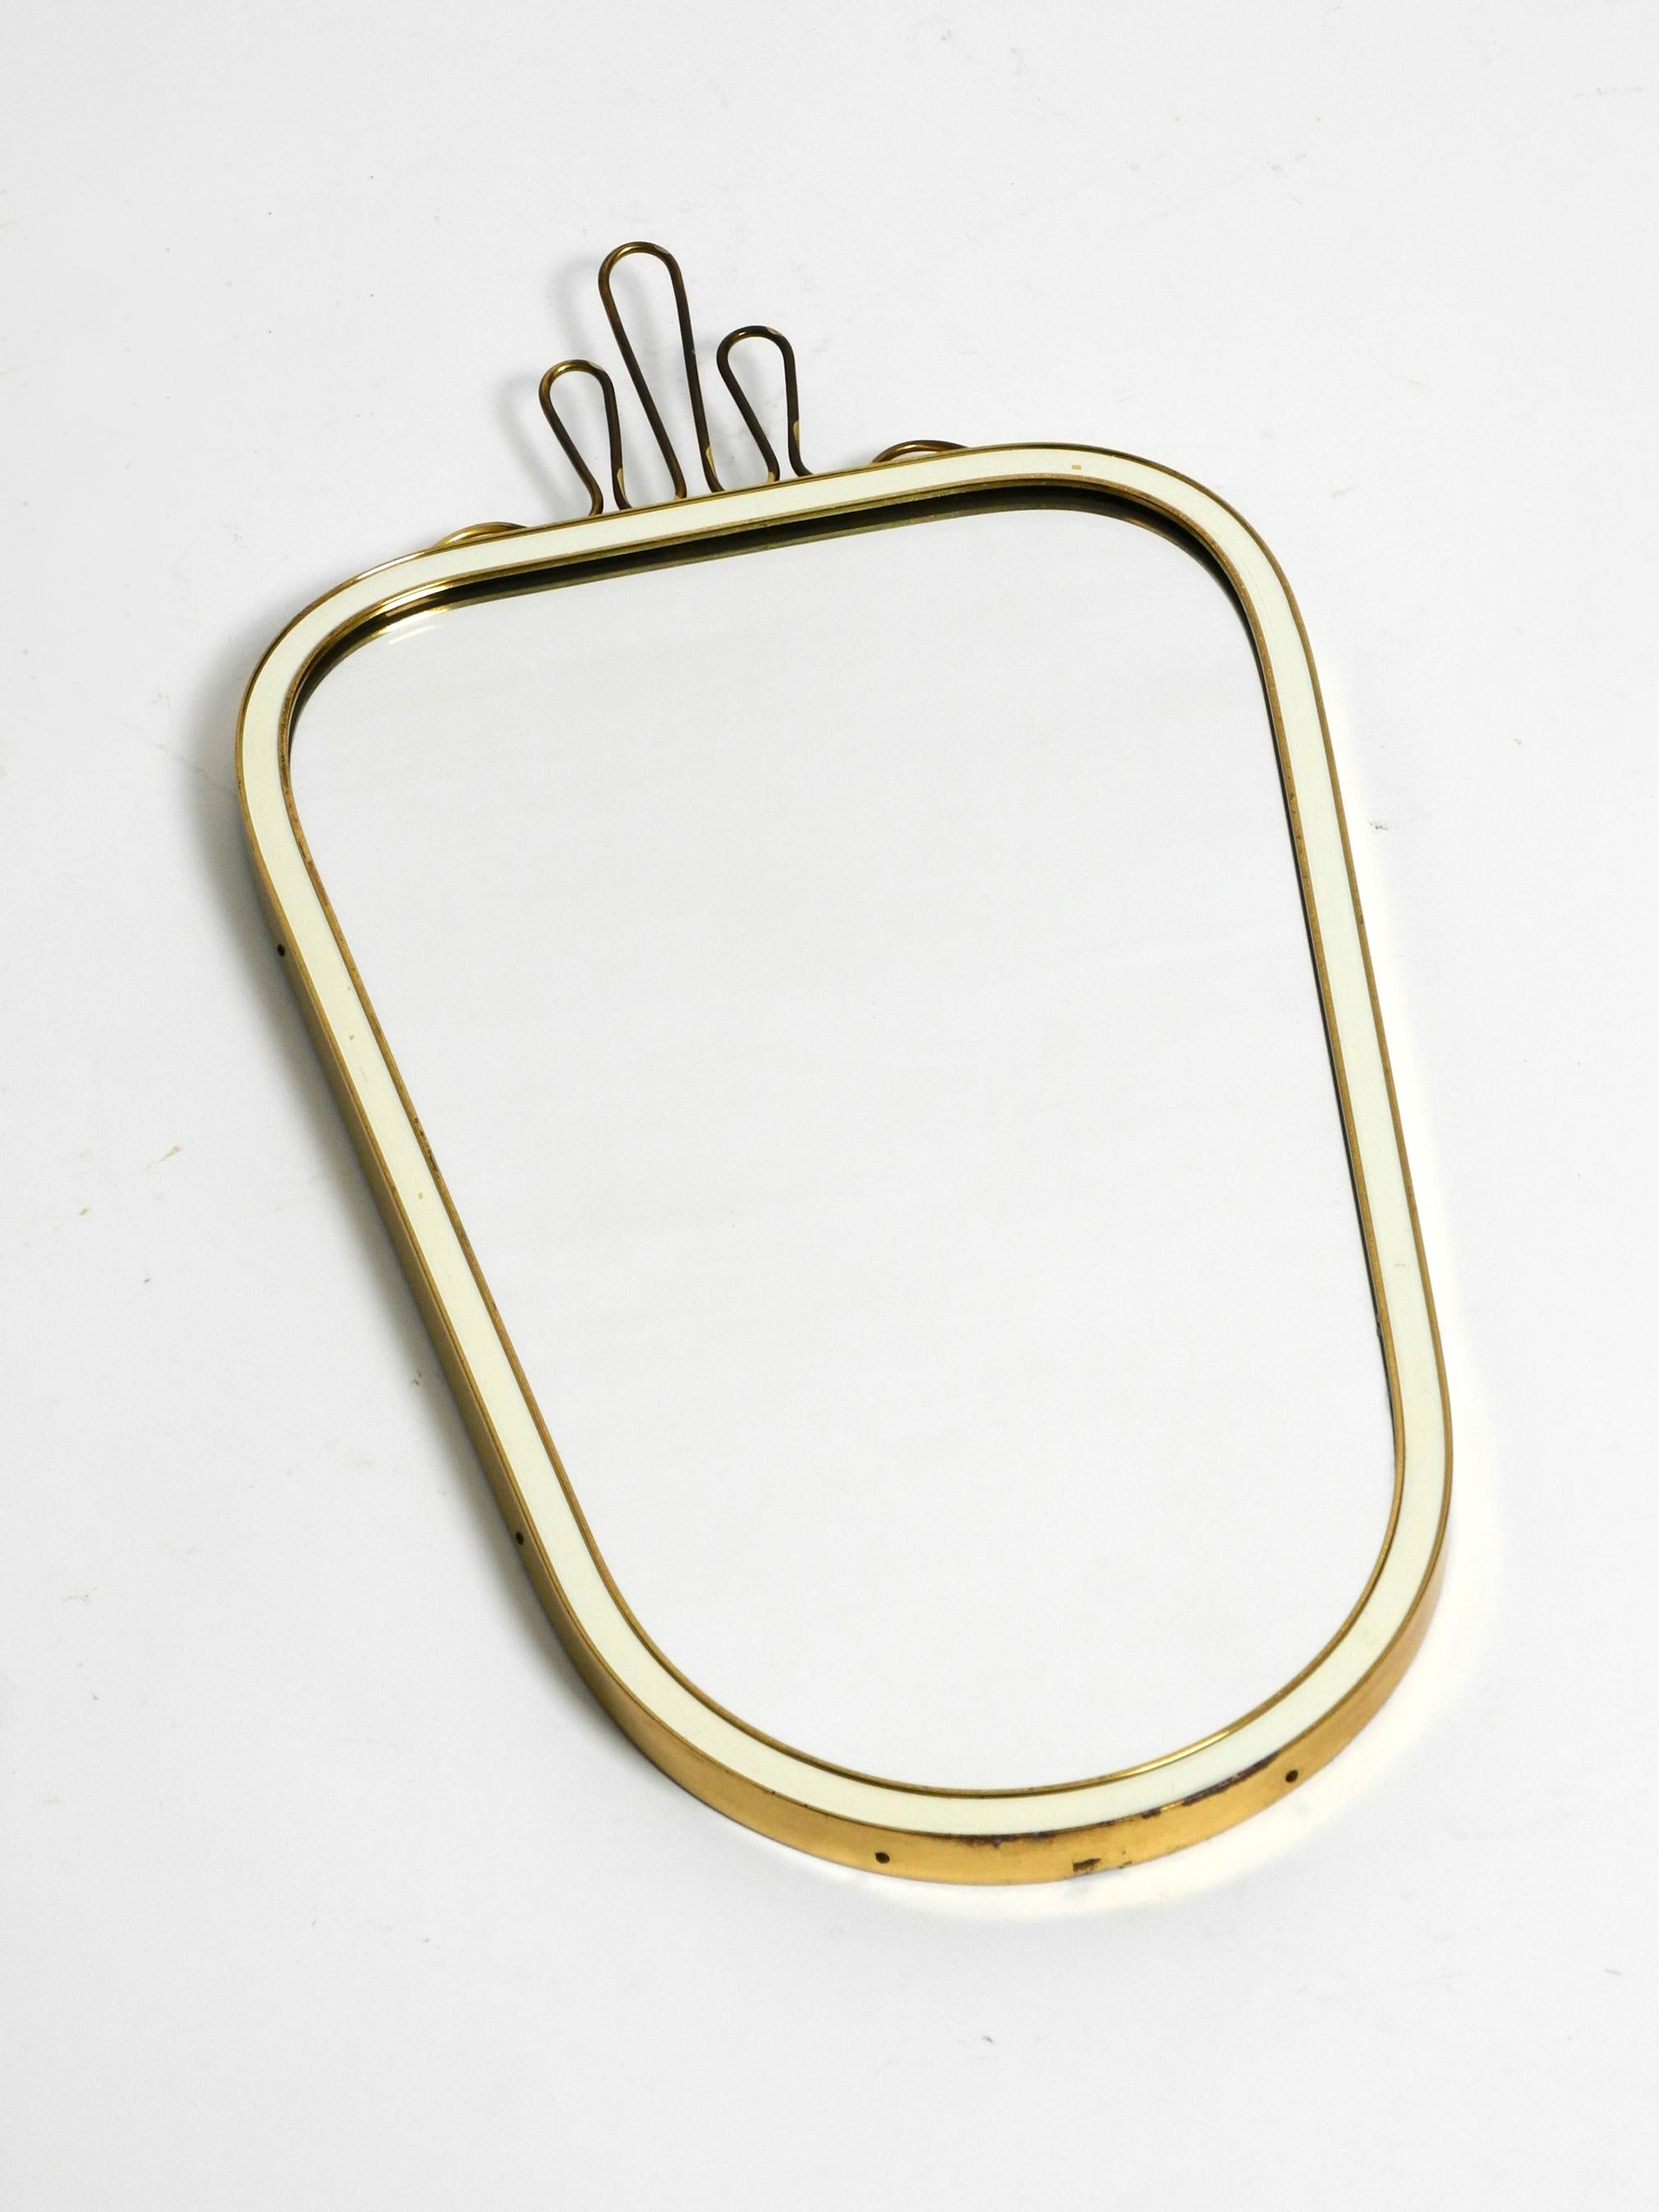 Beautiful heavy small Mid Century brass wall mirror by Münchner Zierspiegel.
Made in Germany. Great 1950s minimalist very elegant design.
Very high quality and elegant workmanship.
A large brass crown is screwed onto the top. The brass frame is